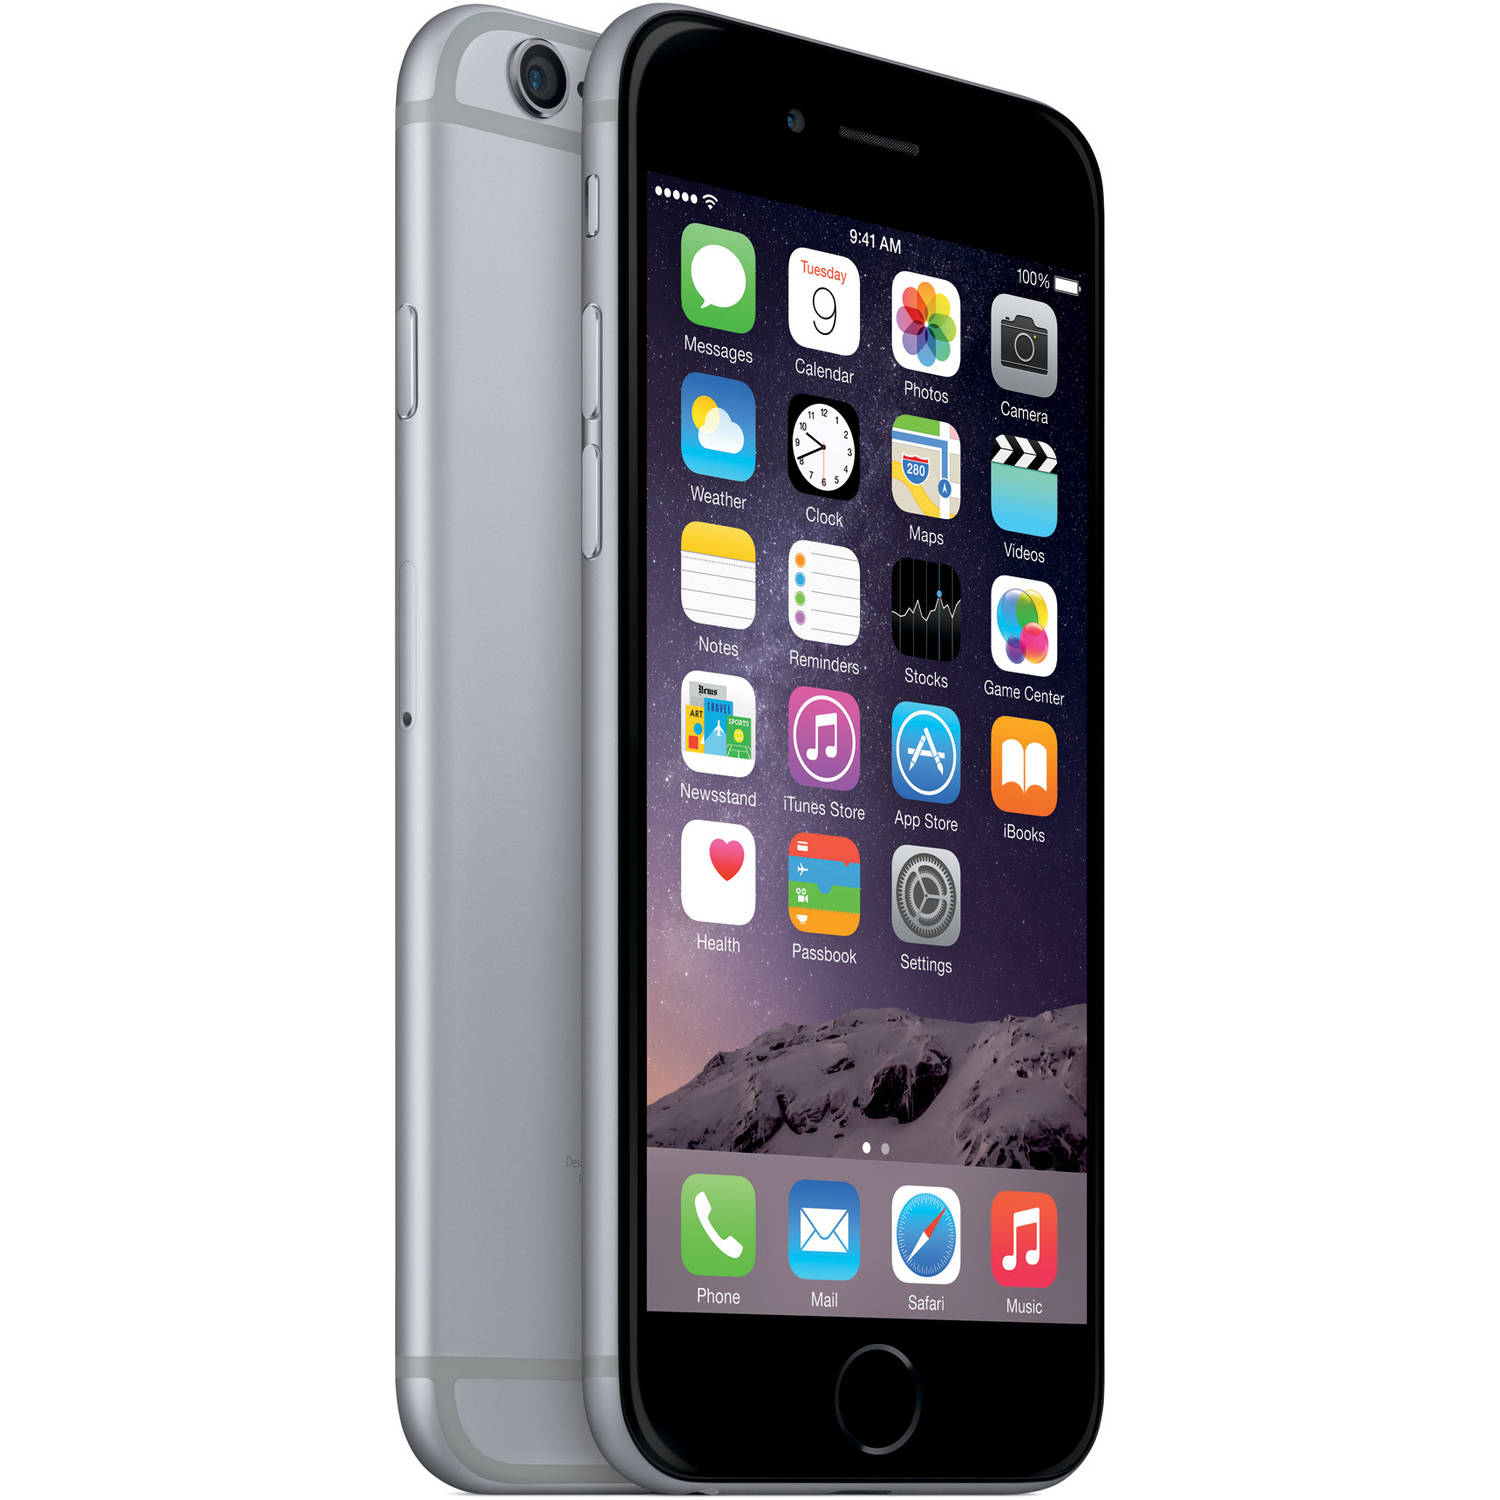 Apple iPhone 6 16GB GSM Unlocked - Space Gray (Used) + Ting SIM Card, $30 Credit - image 1 of 4